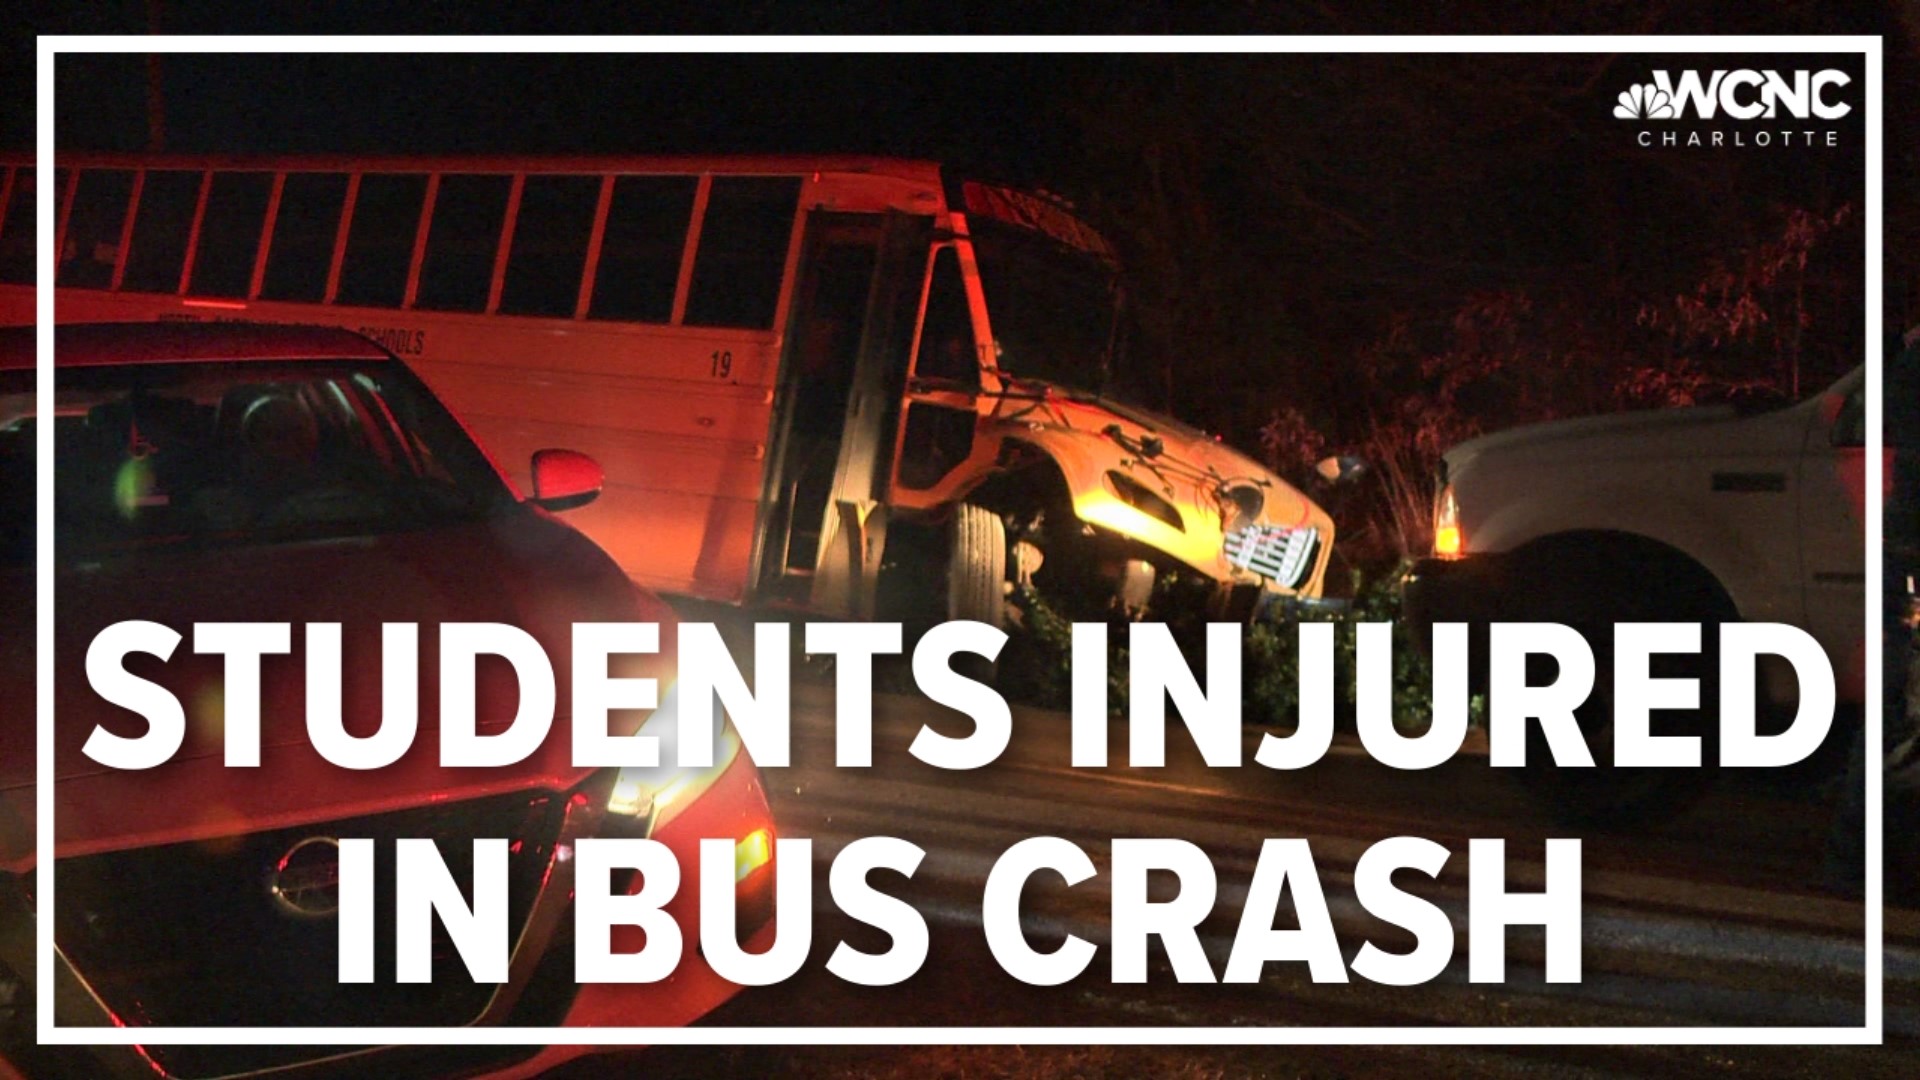 The bus, which was from West Rowan High School, had students and a bus driver on board.